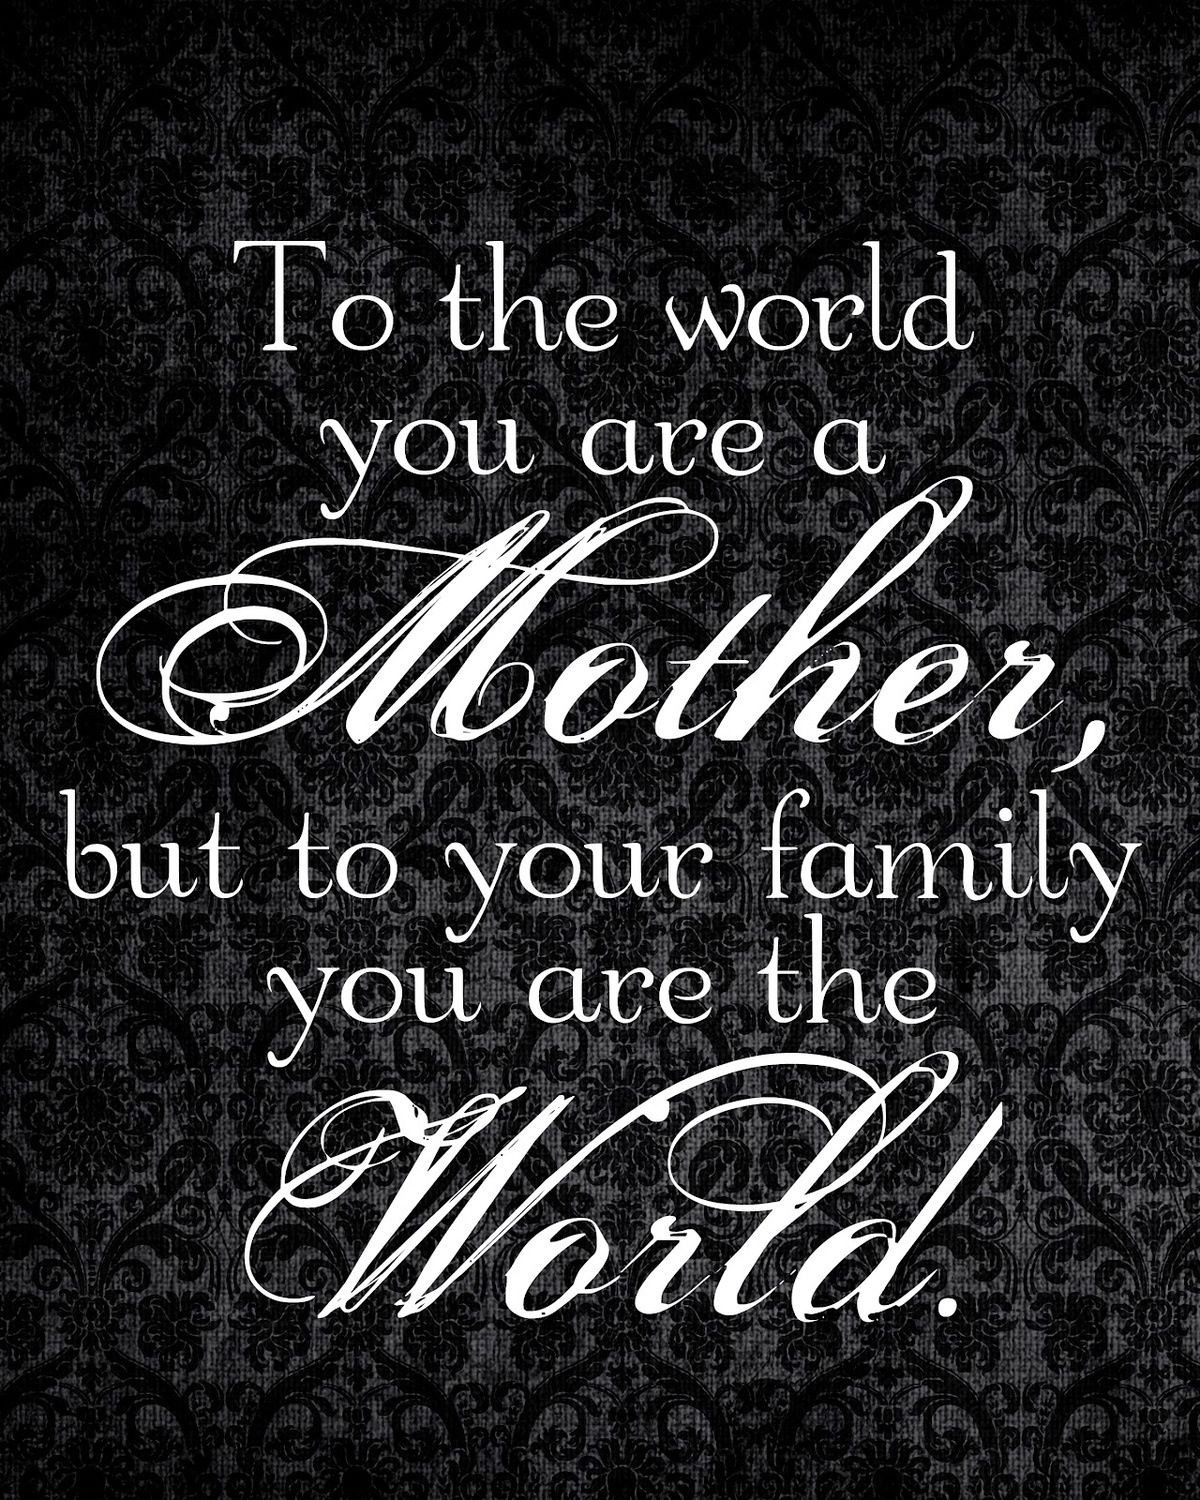 Quotes About Being A Wife And Mother
 Best 25 Family love quotes ideas on Pinterest